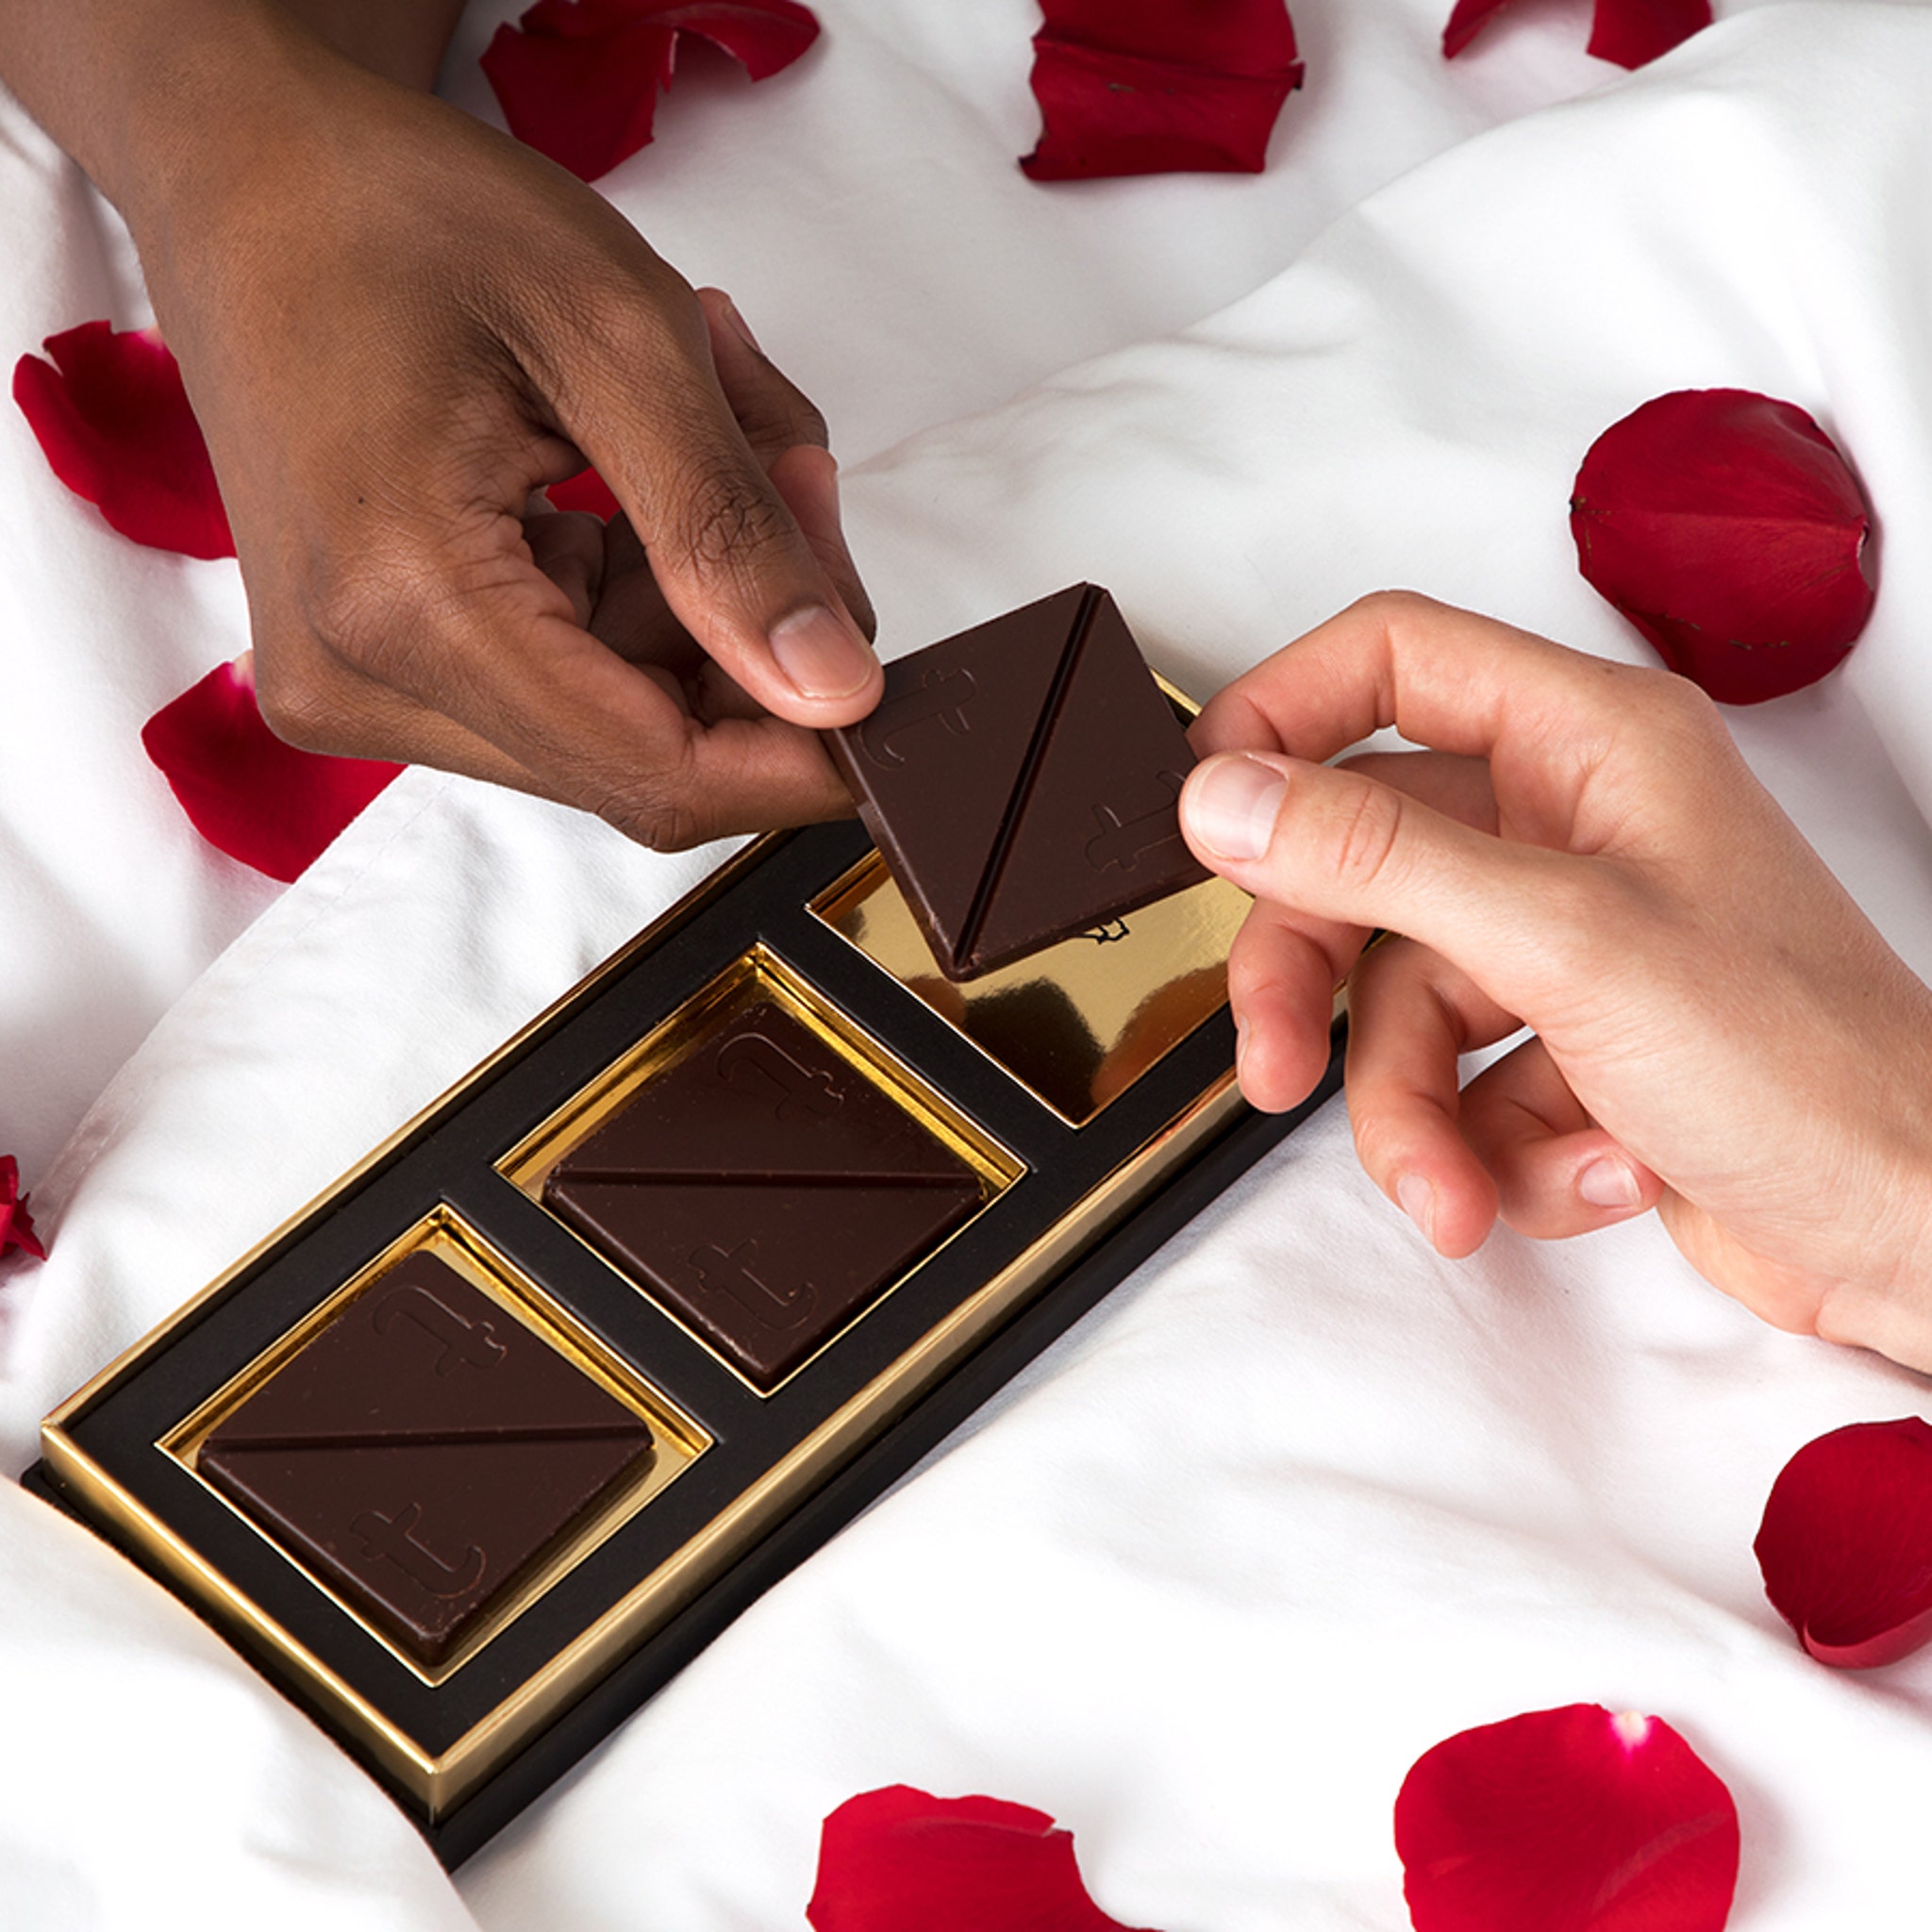 THESE PLEASURE TABS OF SEX CHOCOLATE ARE GOING VIRAL